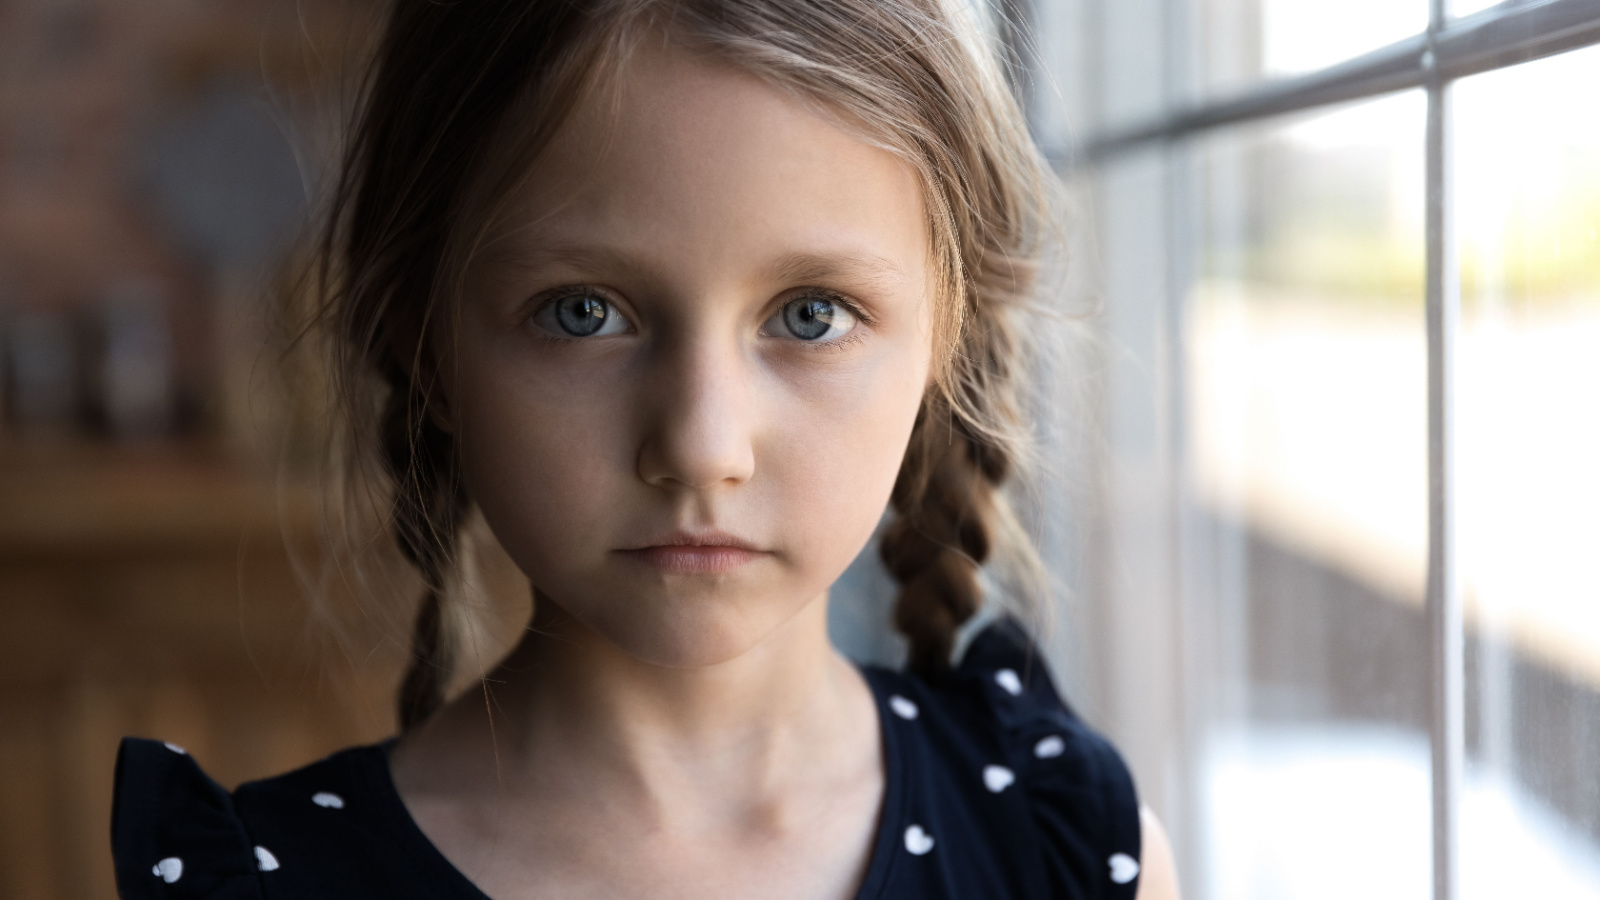 image credit: fizkes/shutterstock <p>Tailor the conversation to suit your child’s age and maturity level. For younger children, keep explanations simple and avoid graphic details. With older children, delve into more complex aspects like mental health and societal issues. It’s crucial to strike a balance between honesty and age-appropriateness.</p>